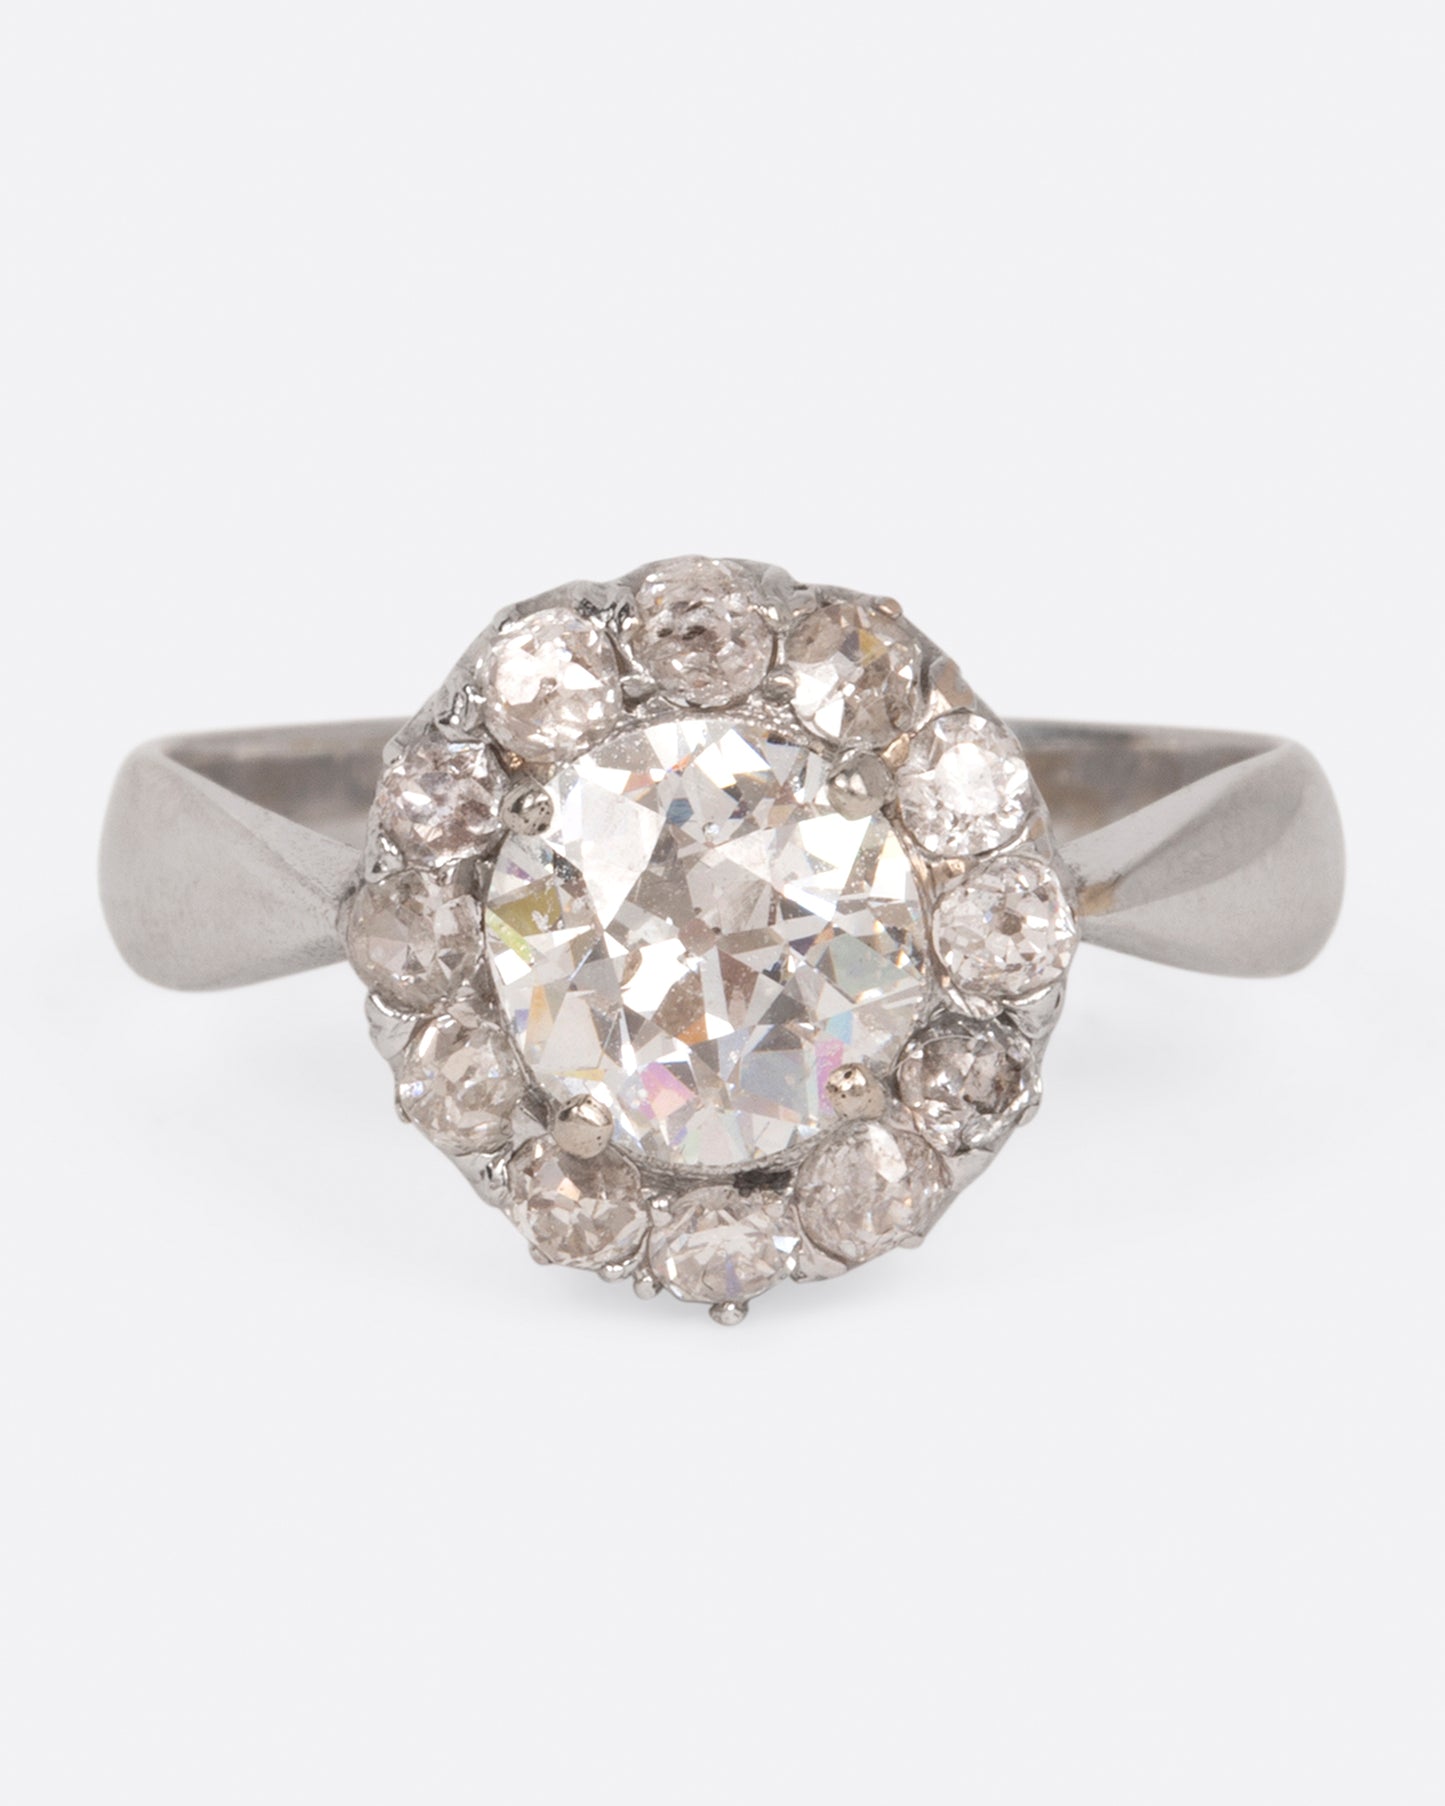 A white gold ring with a tapered band and a flower-shaped cluster of diamonds, shown from the front.